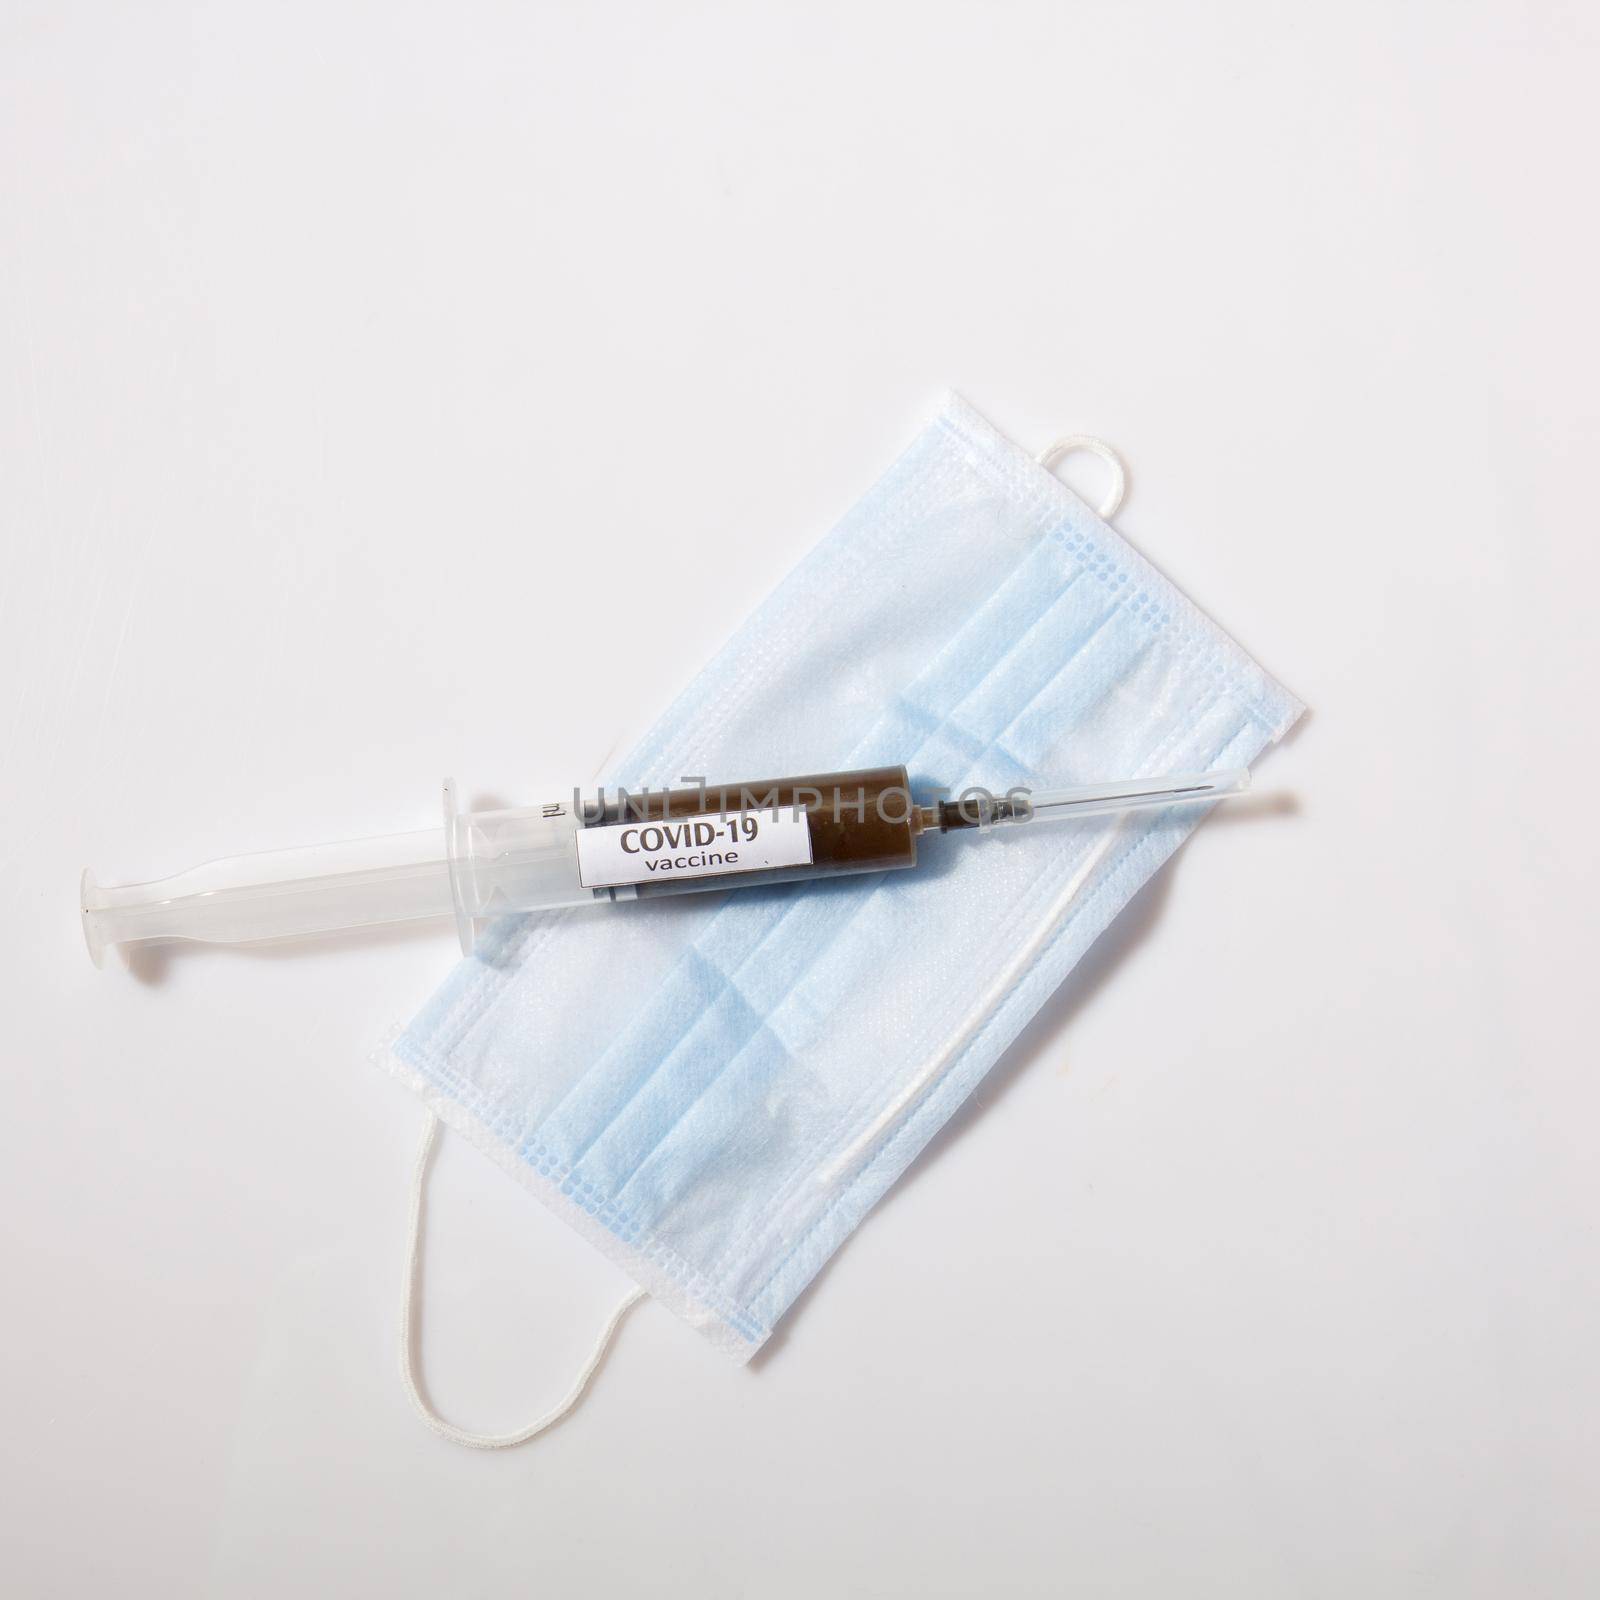 Close up view of needle on a syringe filled with vaccine laying on face mask. on gray background